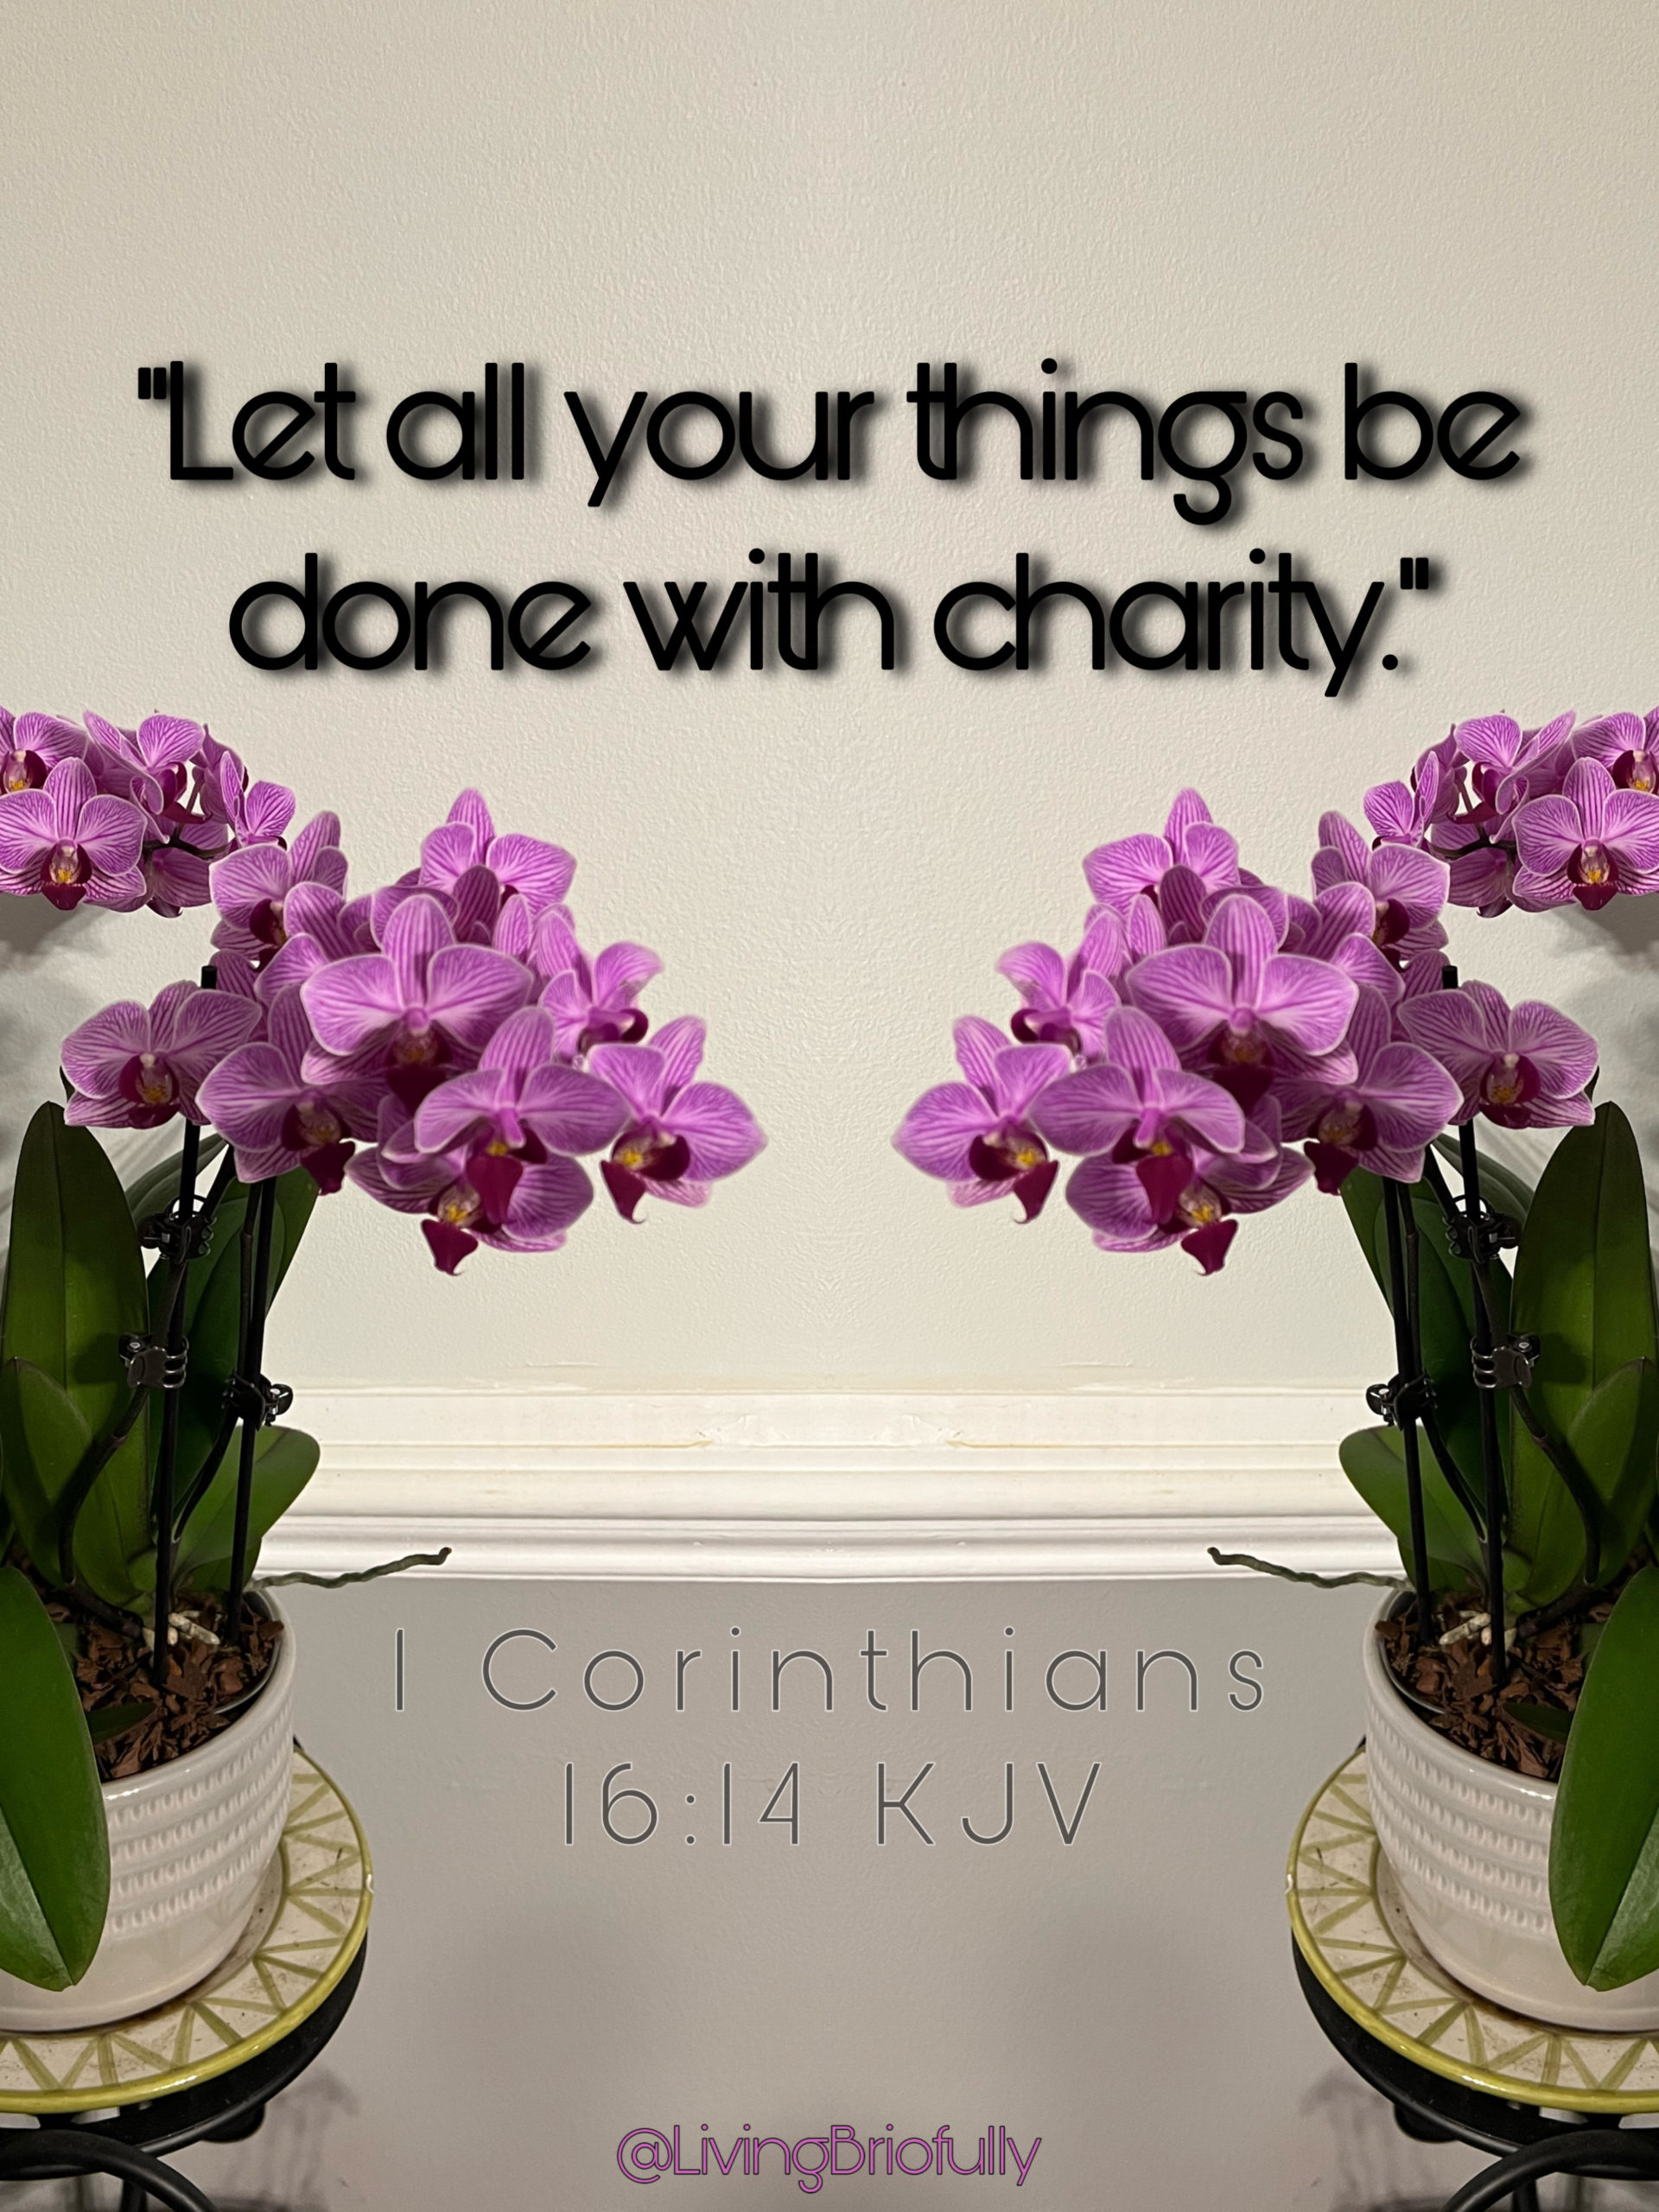 "Let all your things be done with charity" 1 Corinthians 16:14